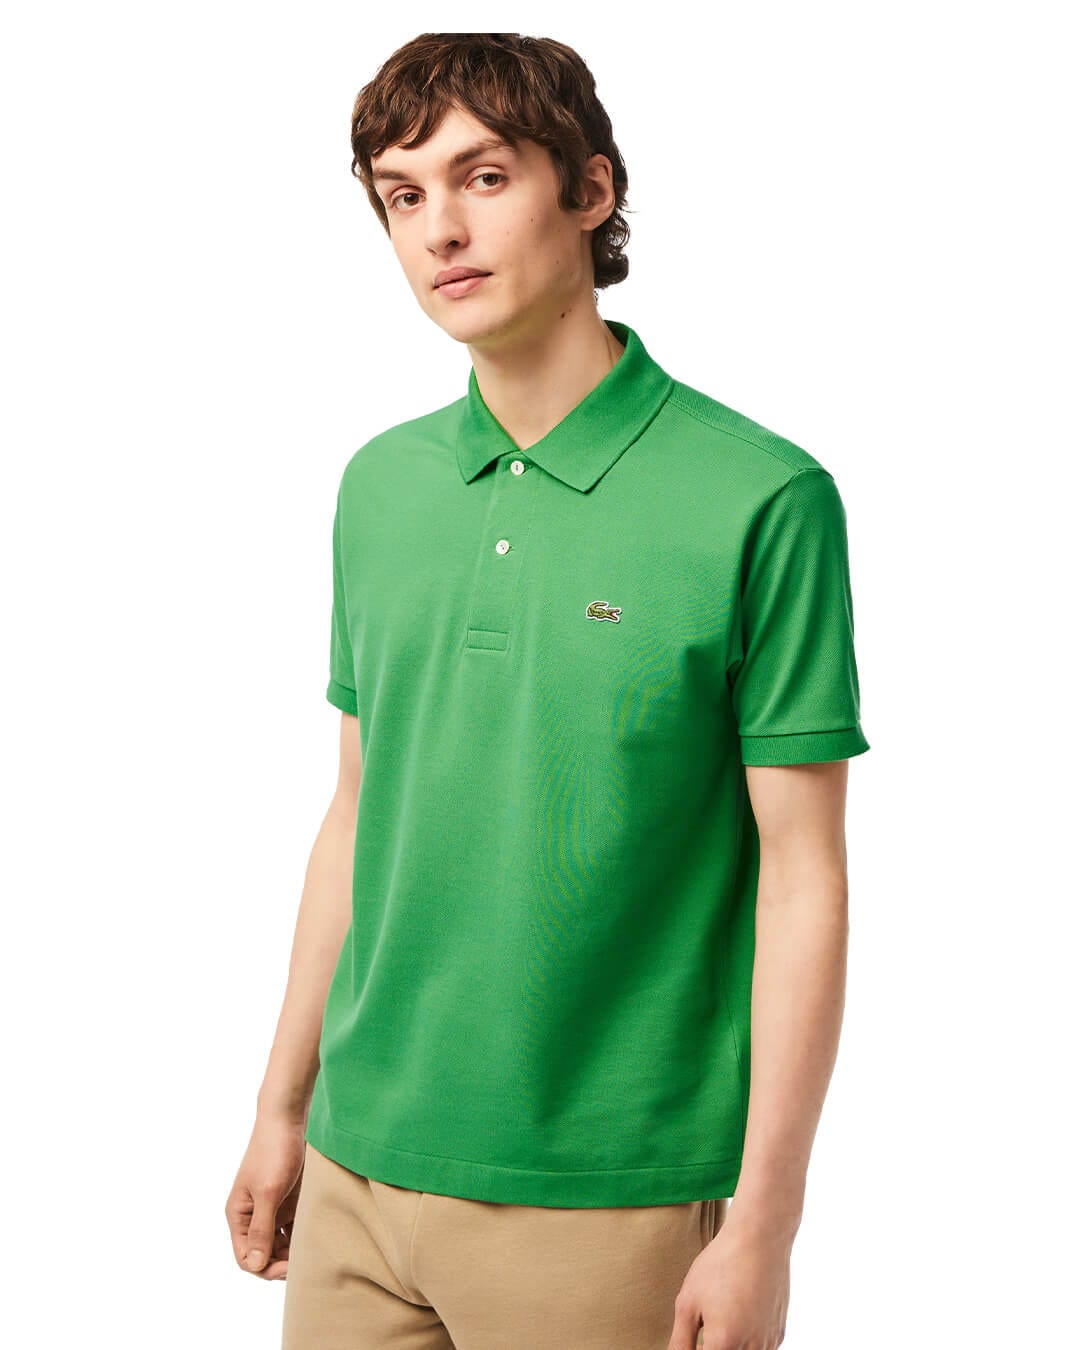 Lacoste Polo Shirts Lacoste Classic Fit L.12.12 Grey Polo Shirt